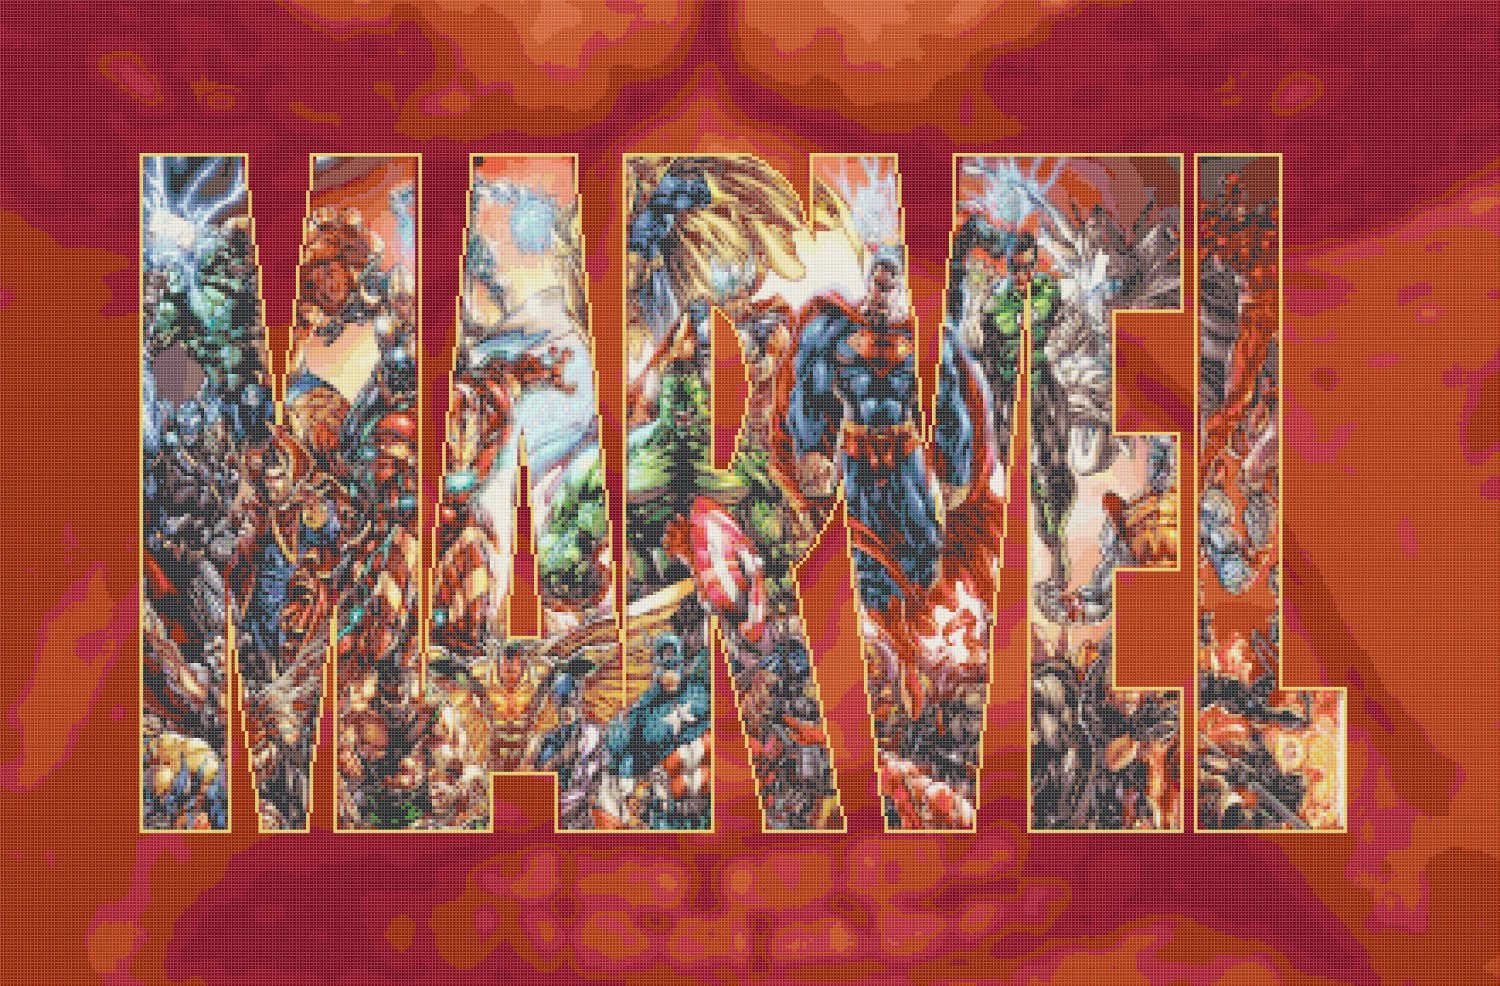 counted cross stitch pattern marvel logo with characters 441*290 stitches E952